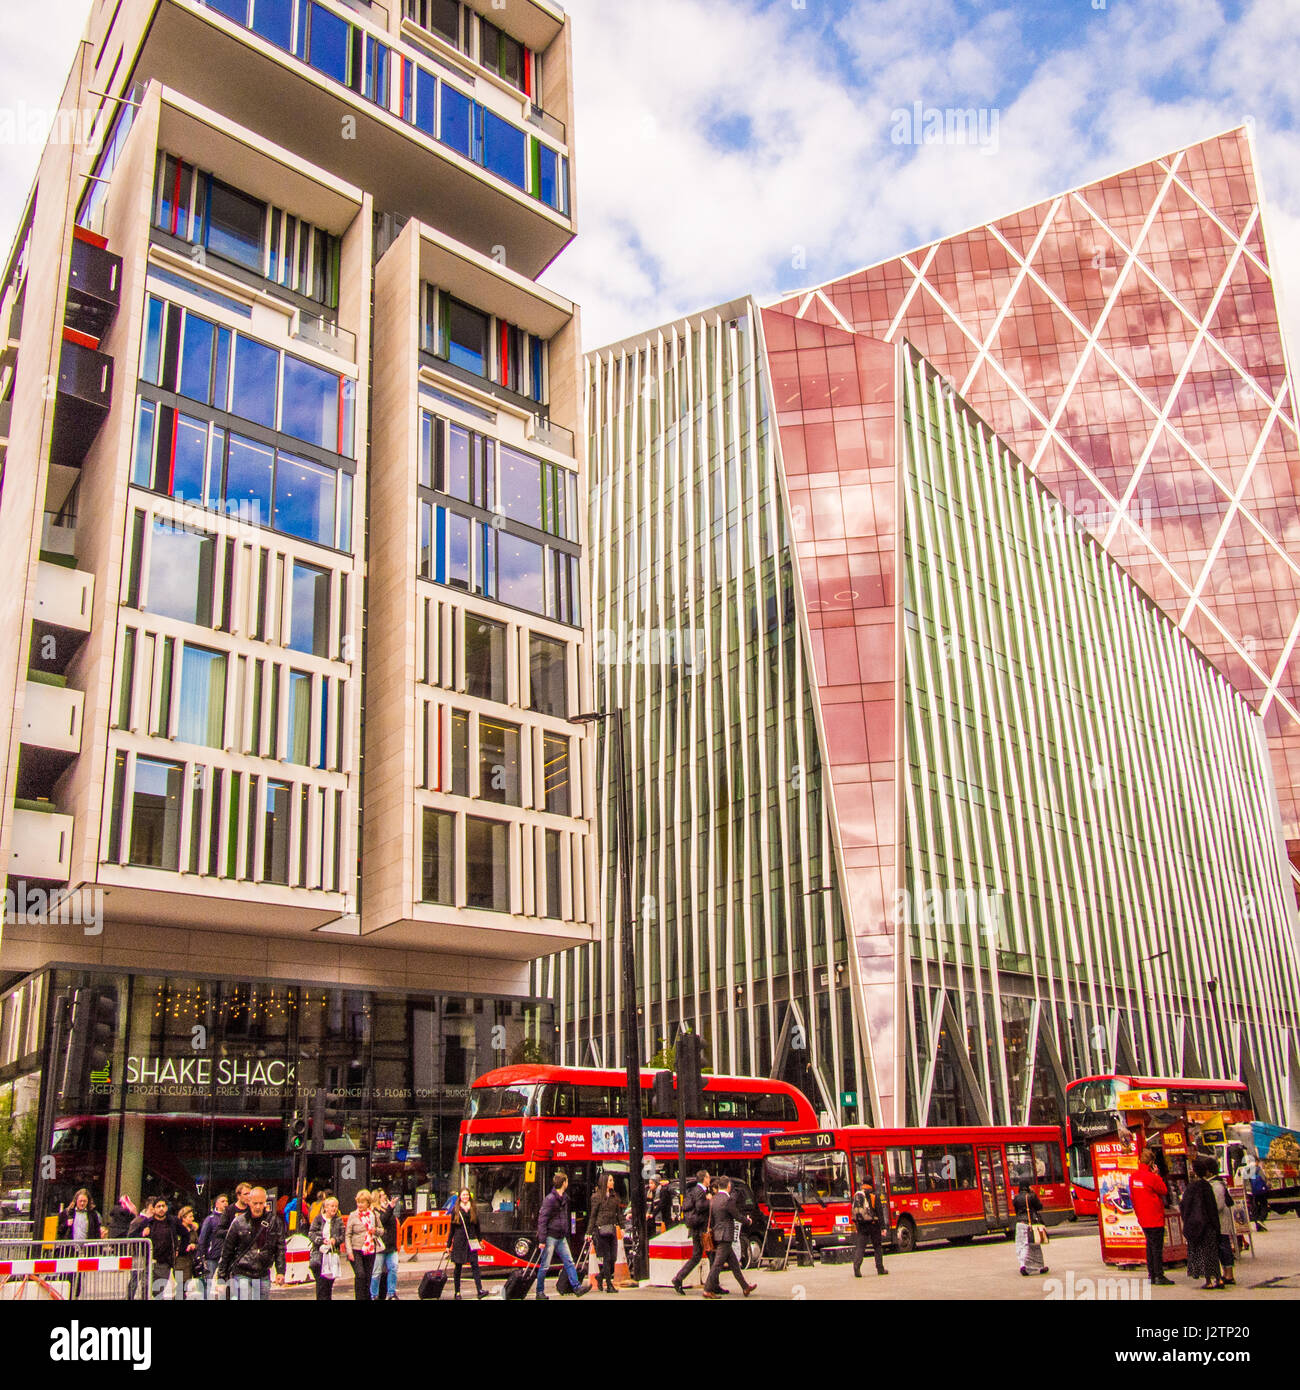 Modern architecture in London along with the traditional red buses Stock Photo